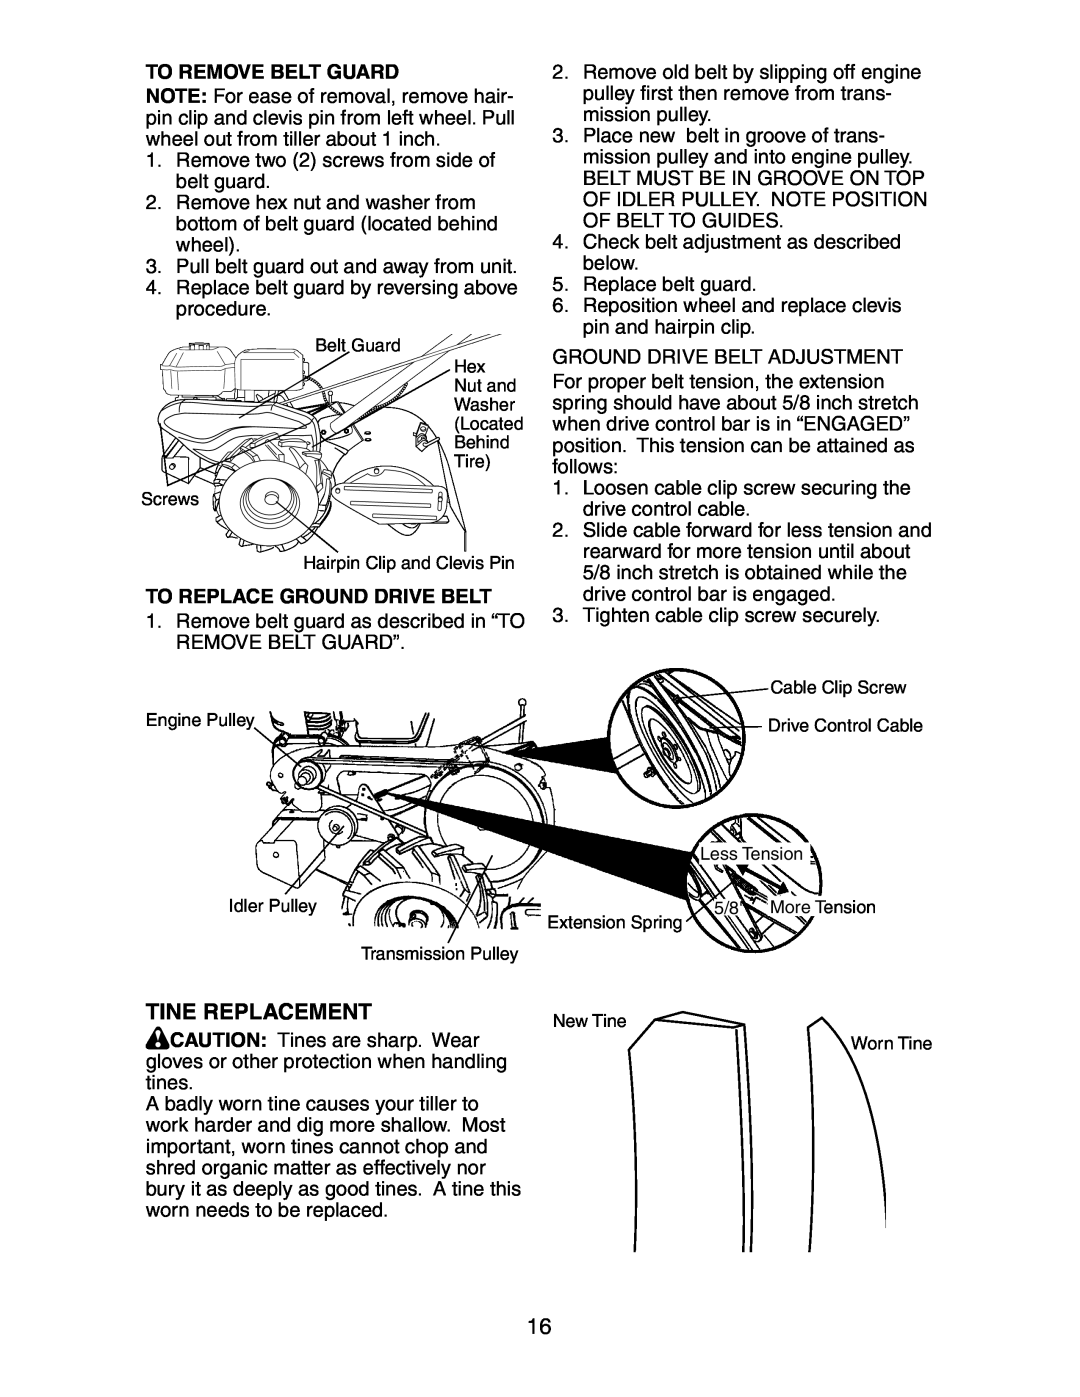 Sears 917.29425 owner manual Tine Replacement, To Remove Belt Guard, To Replace Ground Drive Belt 